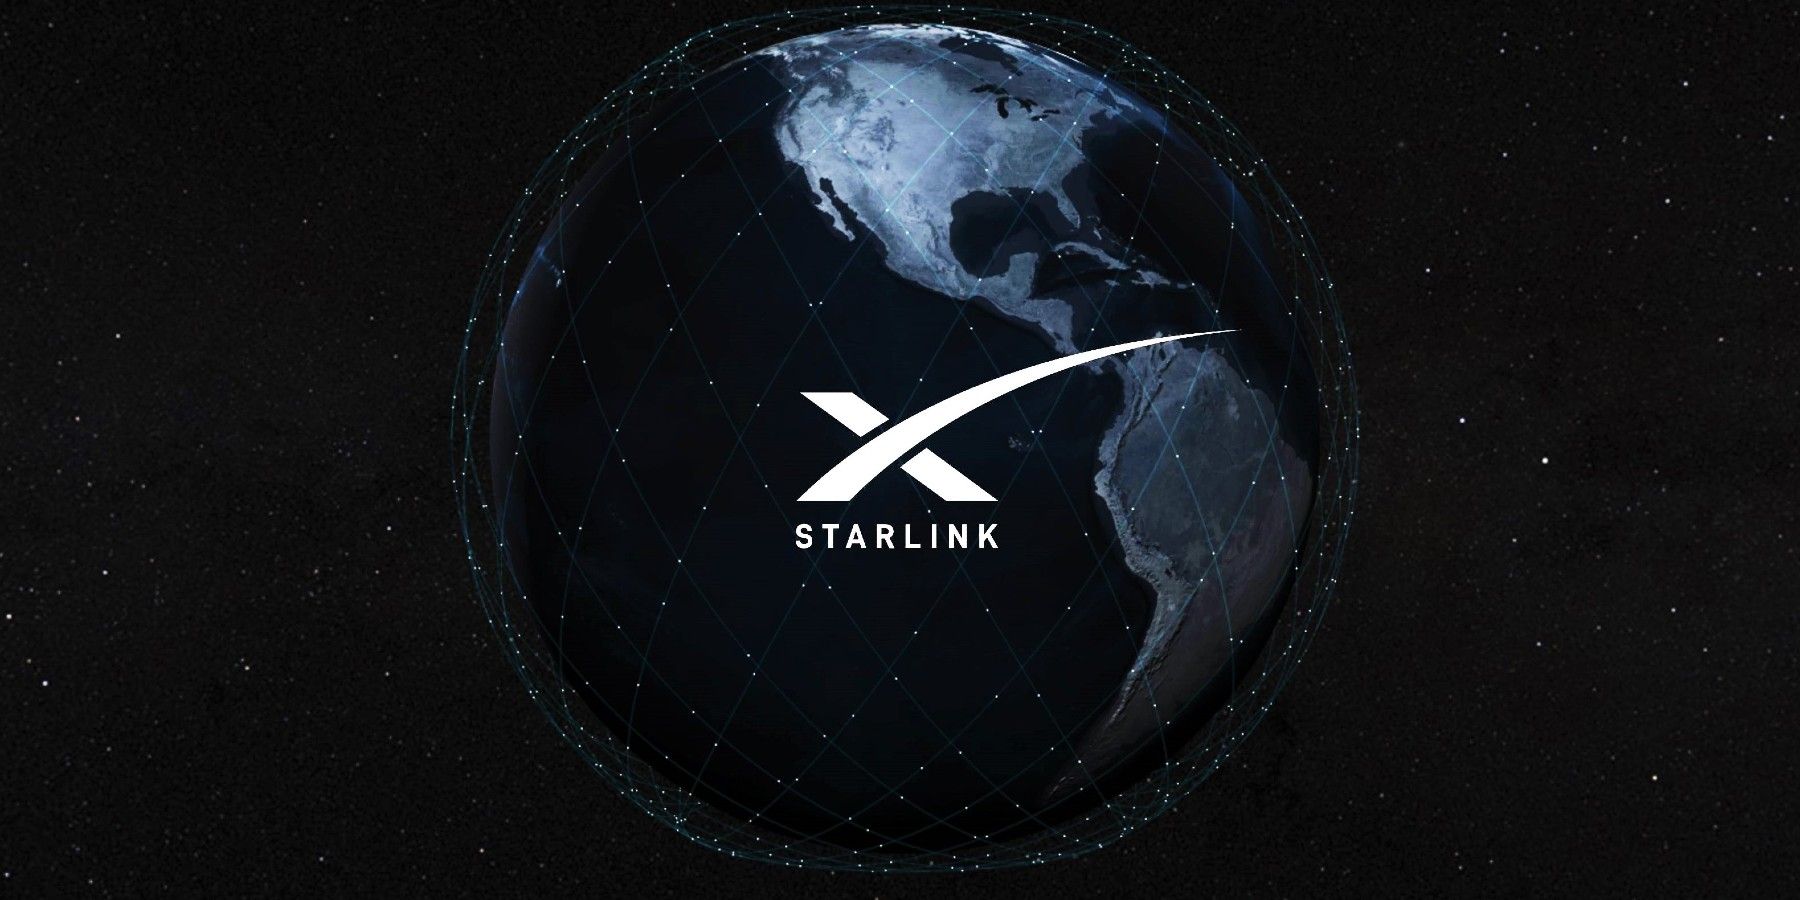 Starlink logo over Earth viewed from space